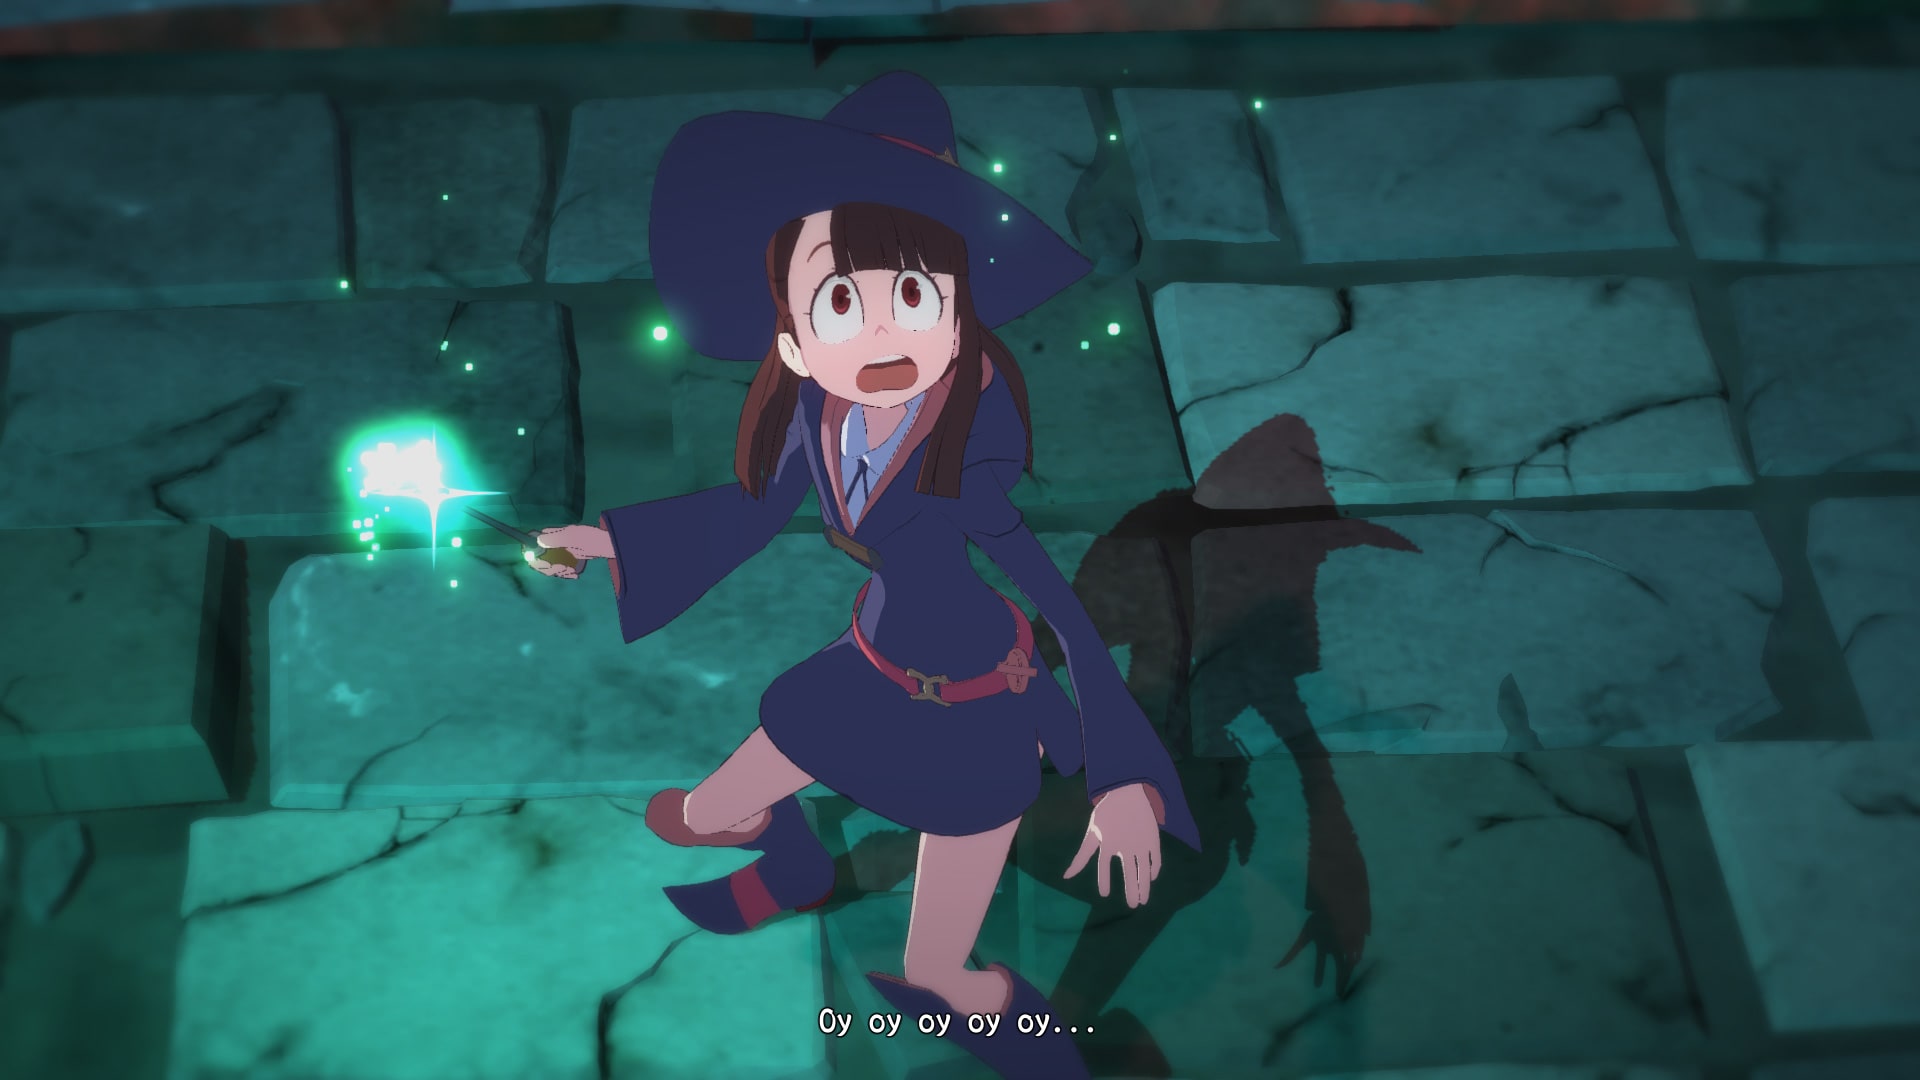 Little Witch Academia: Chamber of Time digital for PlayStation 4 - Bitcoin  & Lightning accepted